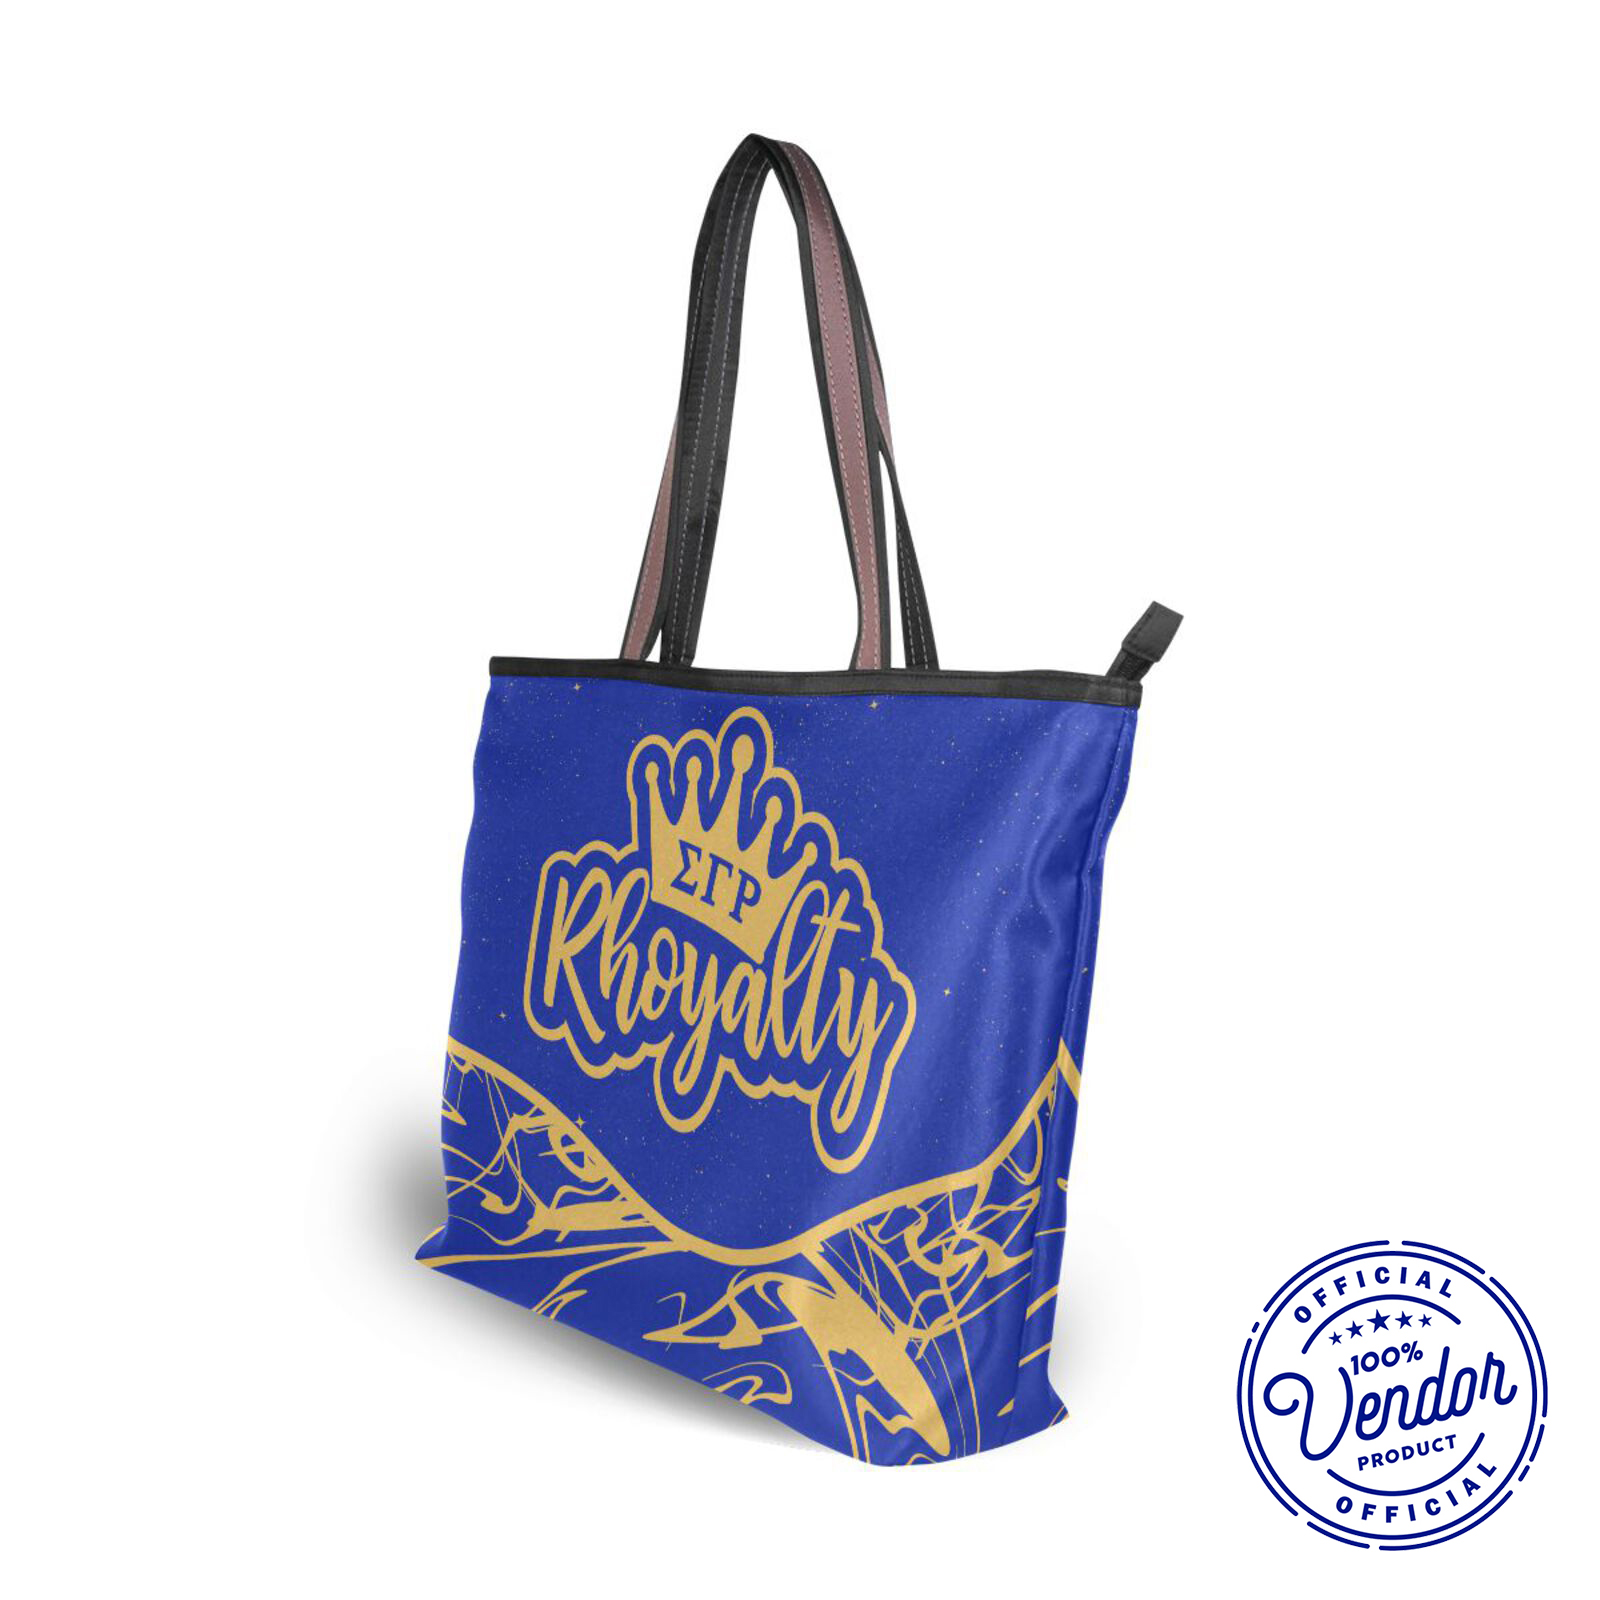 Sigma Ombre Tote Bag - RHOyalty by RG Apparel Co.